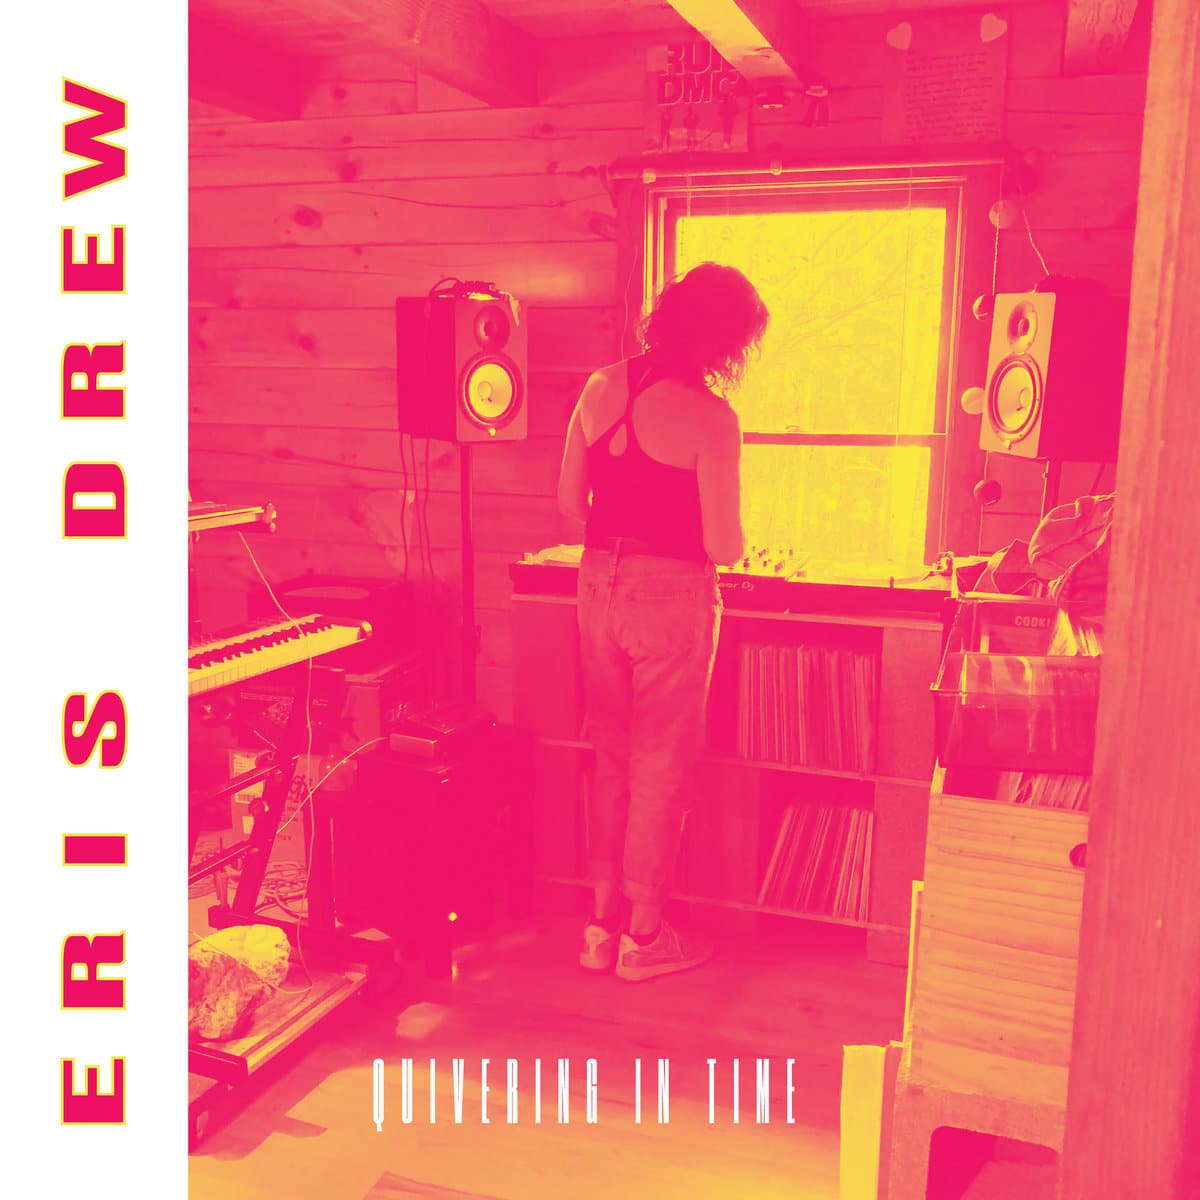 Eris Drew - Quivering In Time - T4T006 - T4T LUV NRG